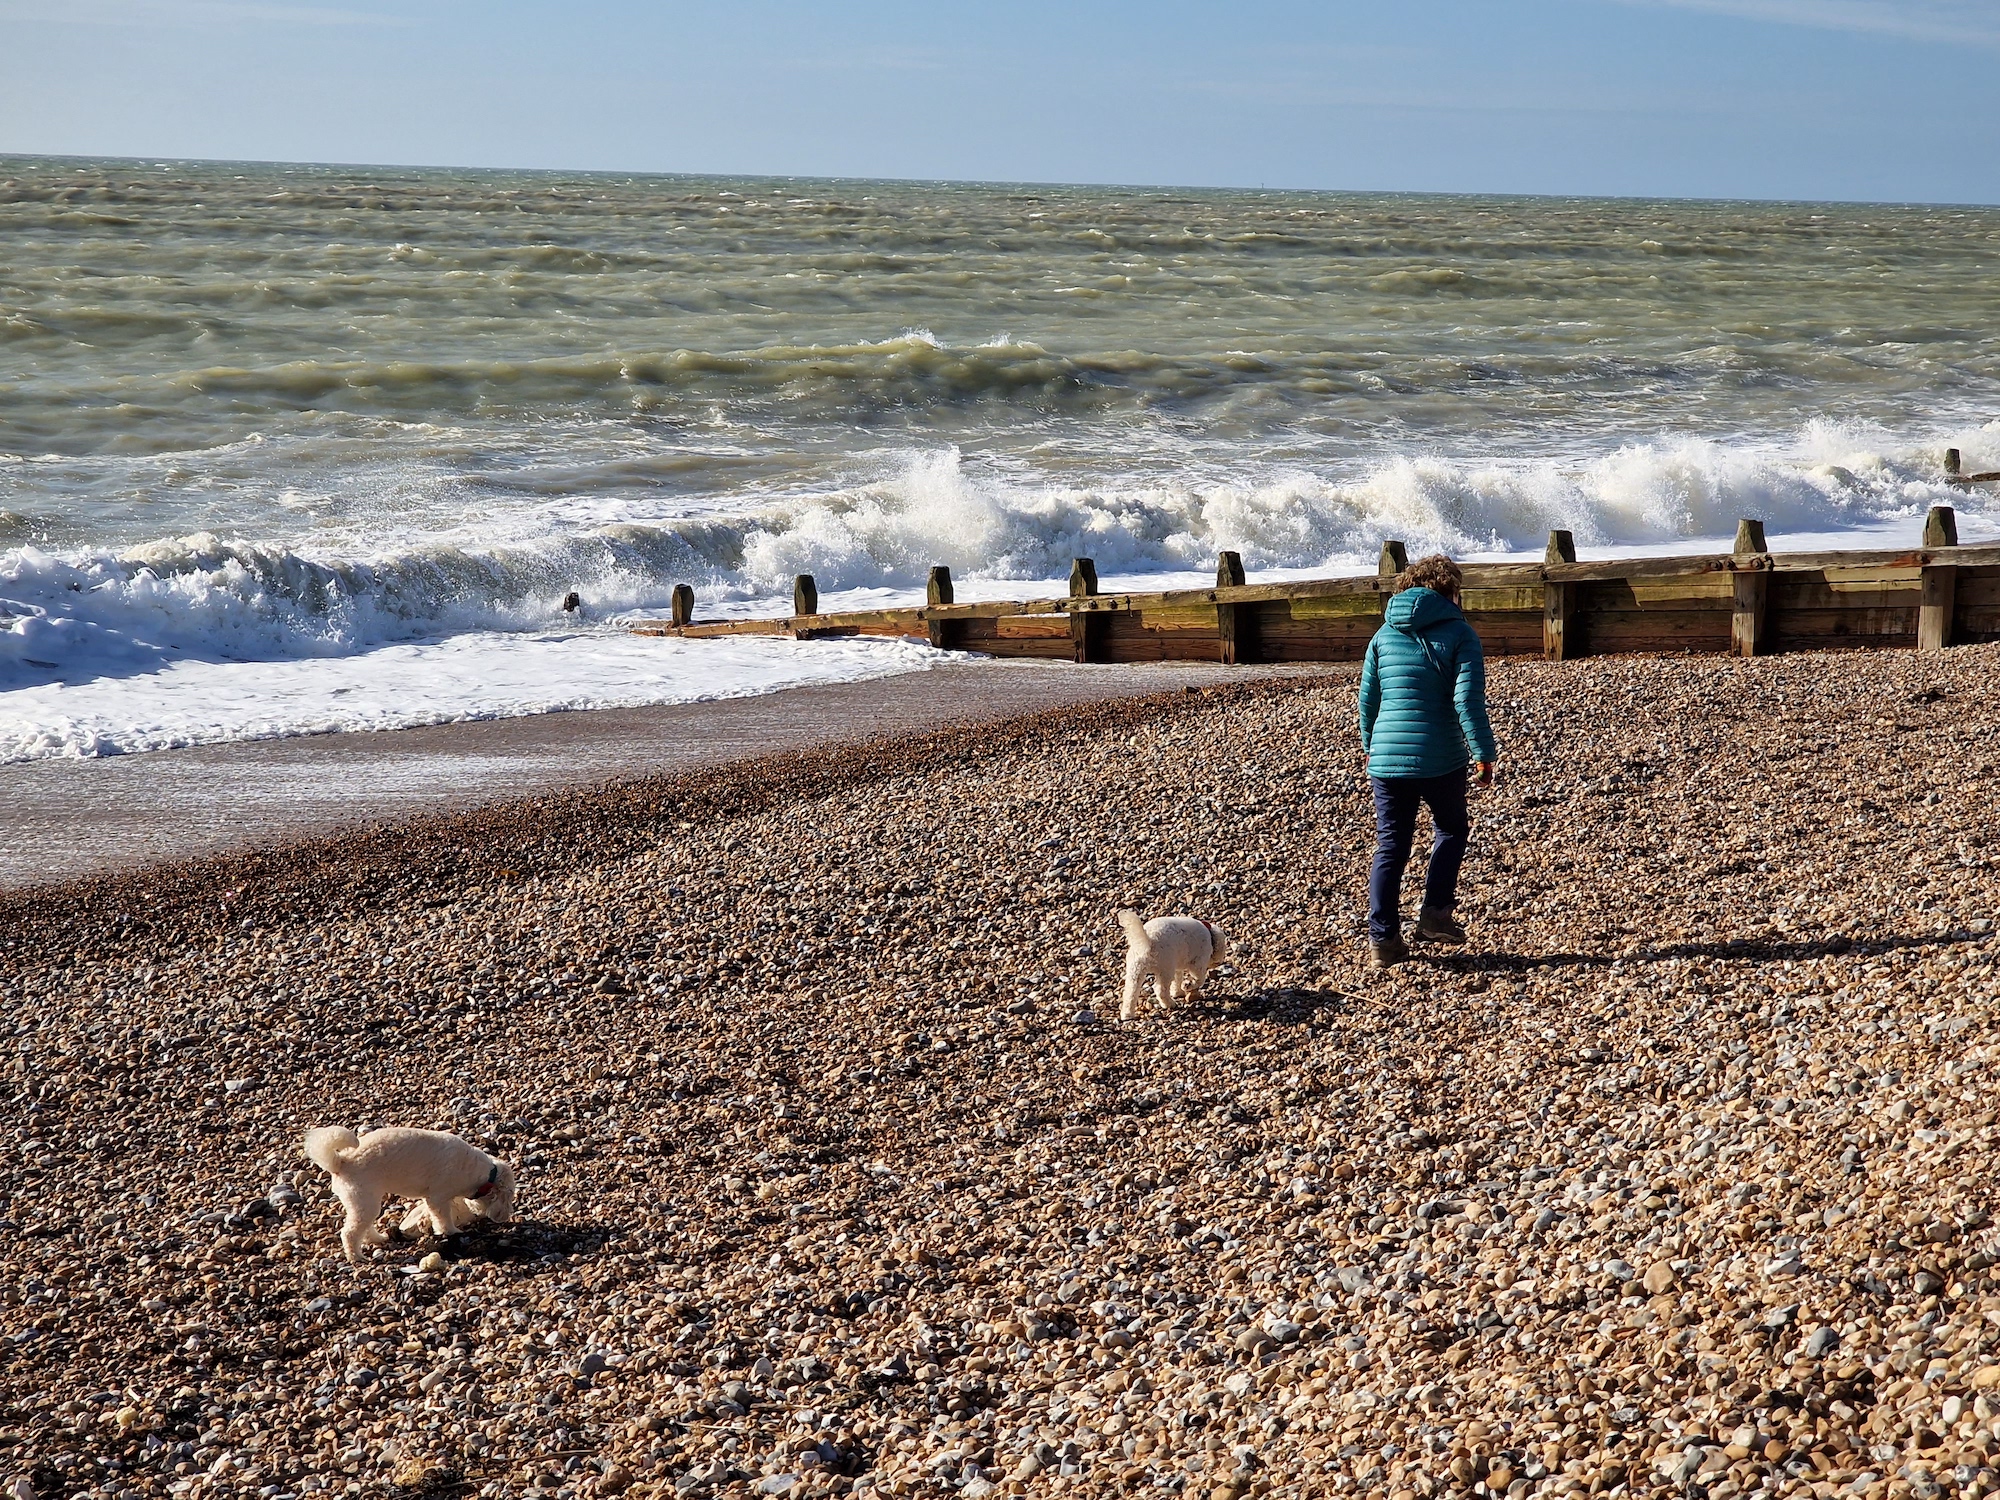 A person and two dogs walk on the beach.